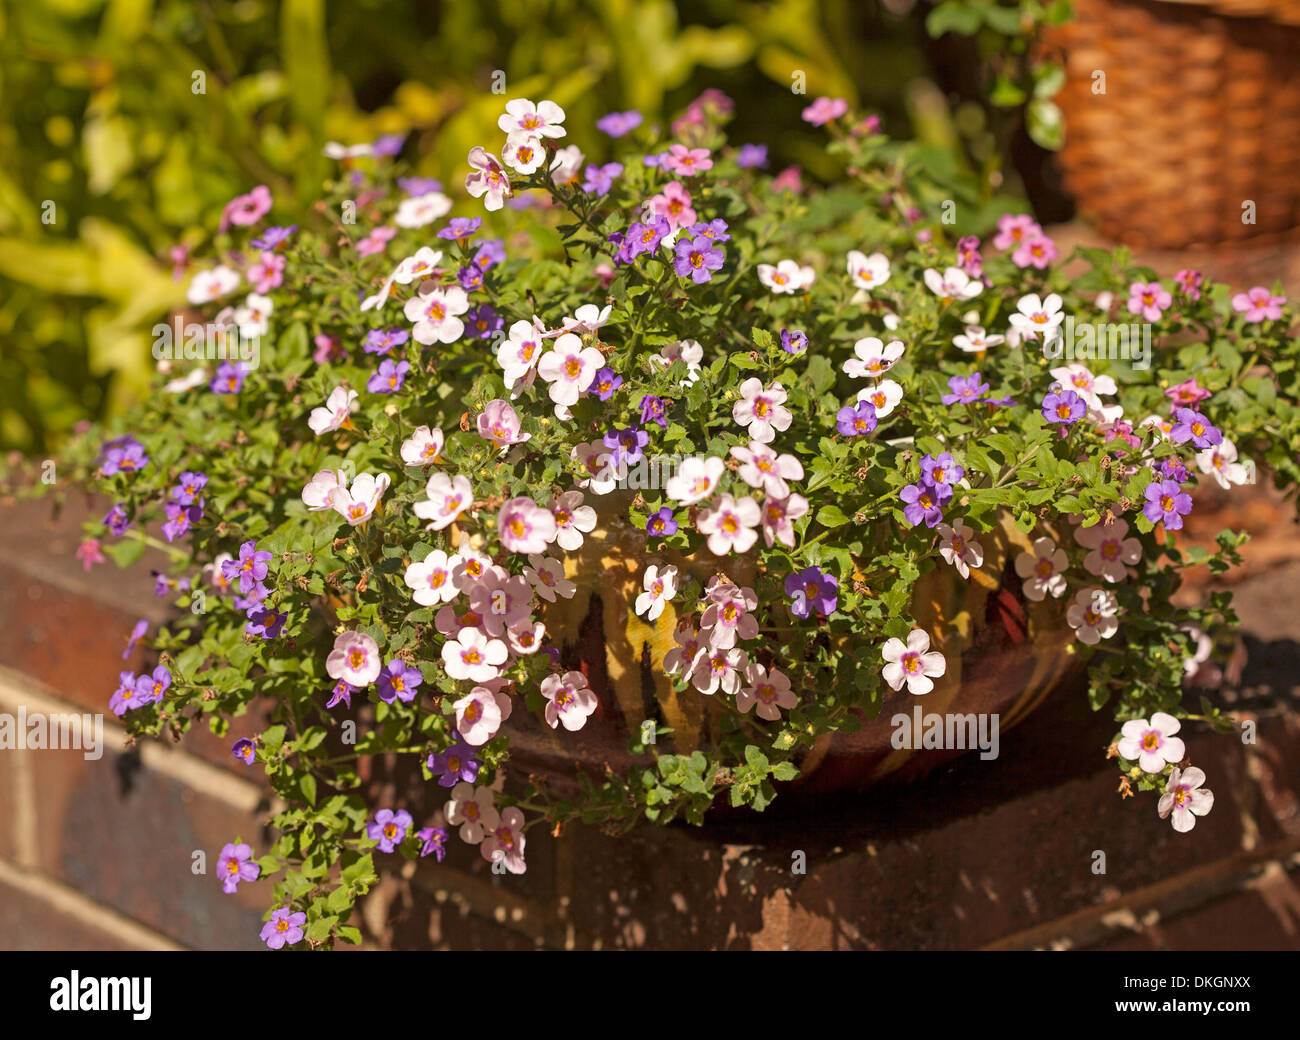 Sutera cordata, flowering perennial with masses of pink, mauve and white flowers growing in large decorative container Stock Photo